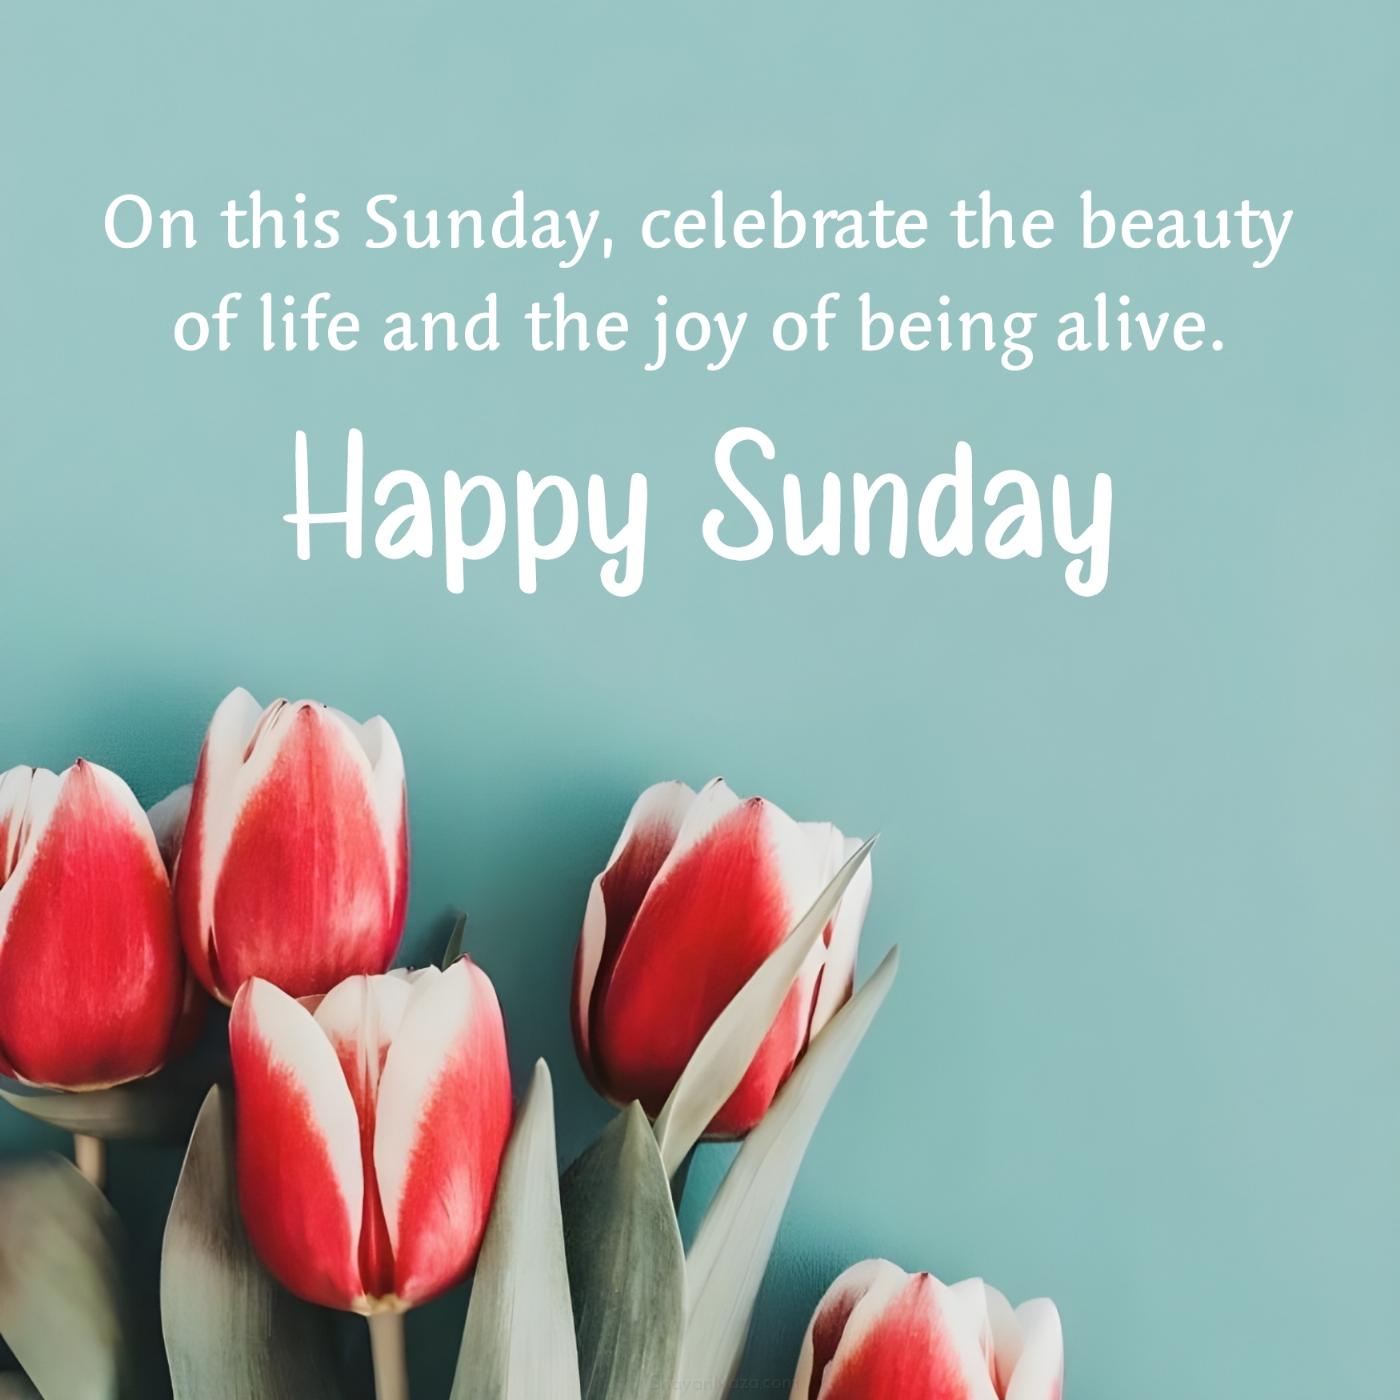 On this Sunday celebrate the beauty of life